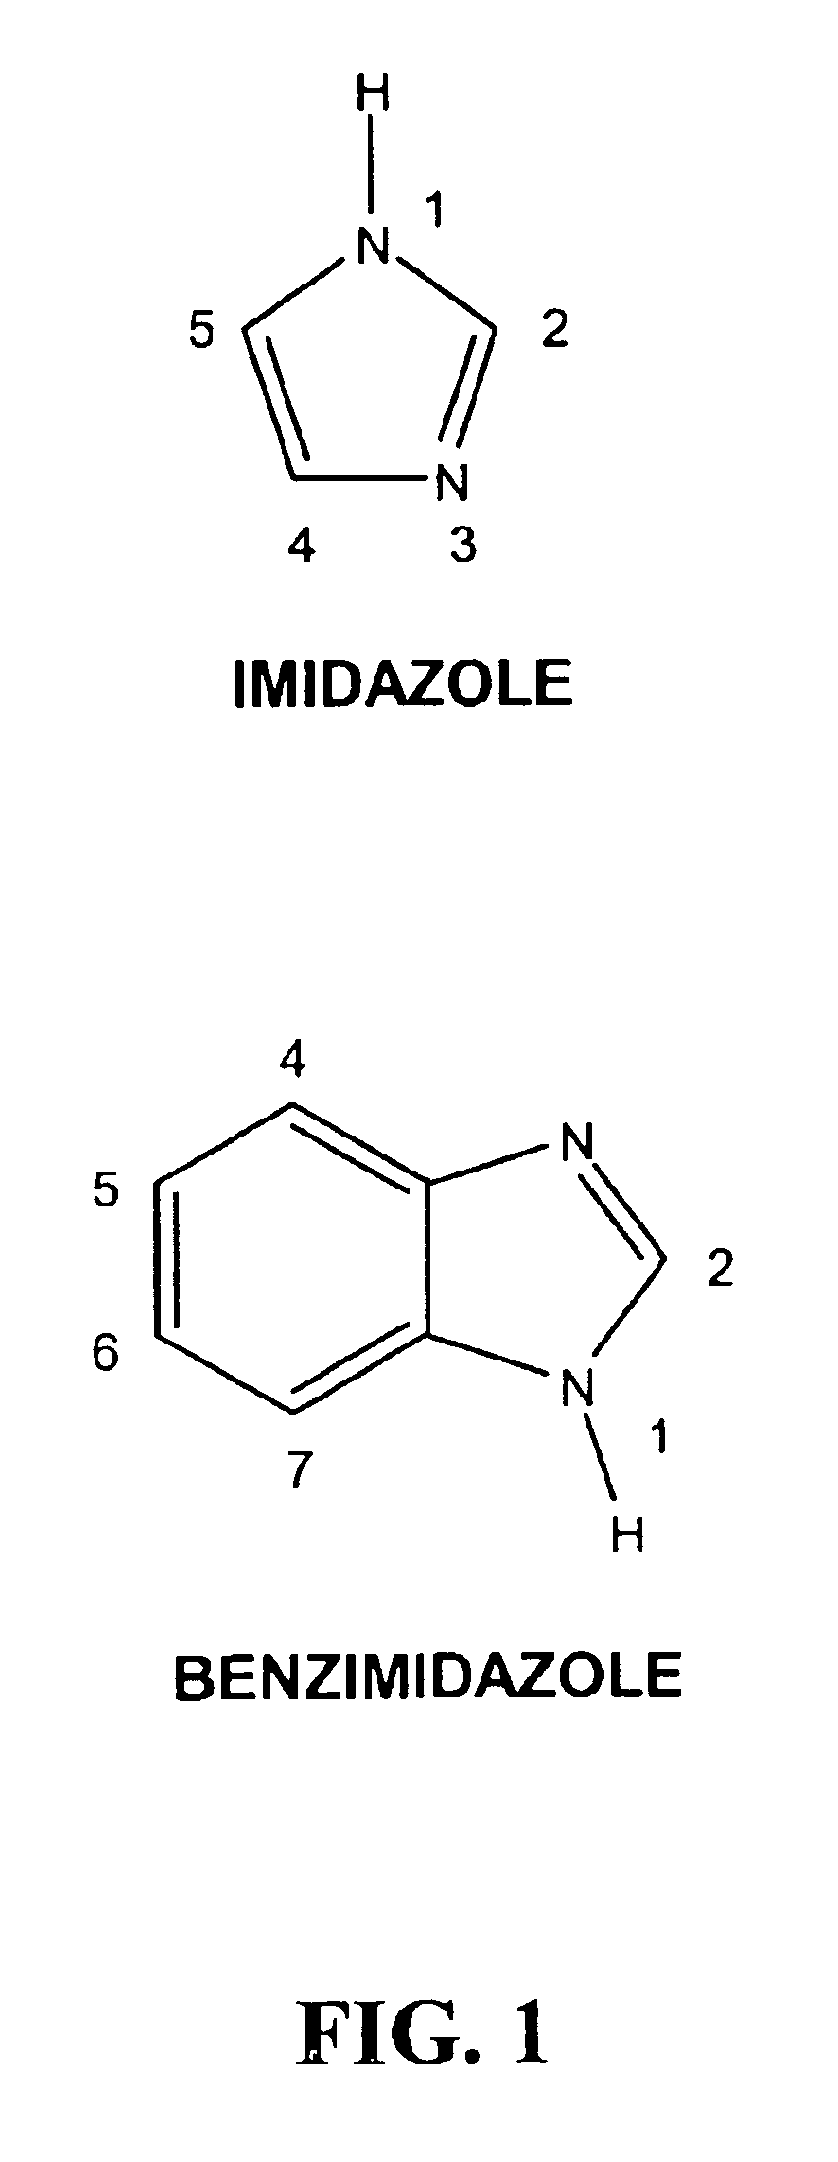 Substituted benzimidazoles as non-nucleoside inhibitors of reverse transcriptase